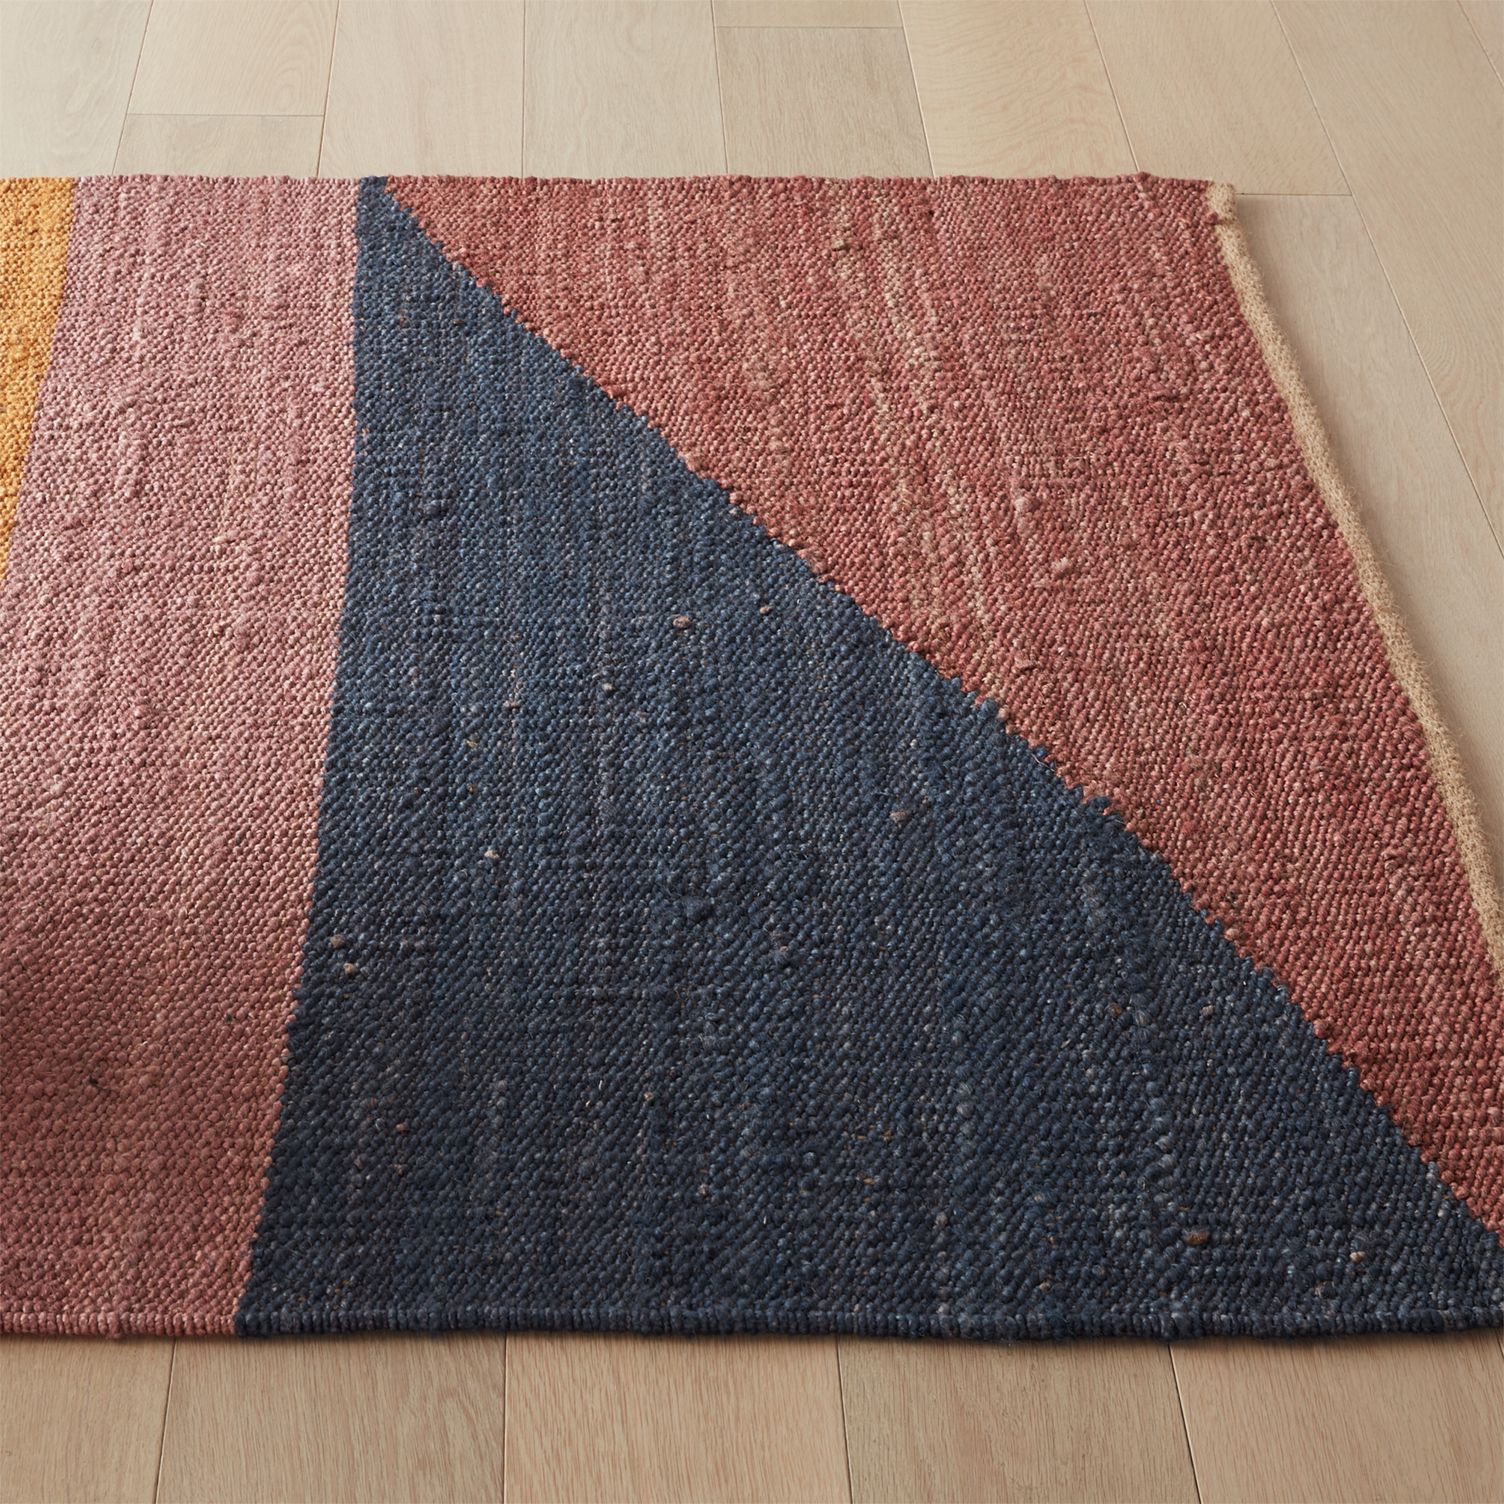 Jute-rug-in-warm-tones-from-CB2